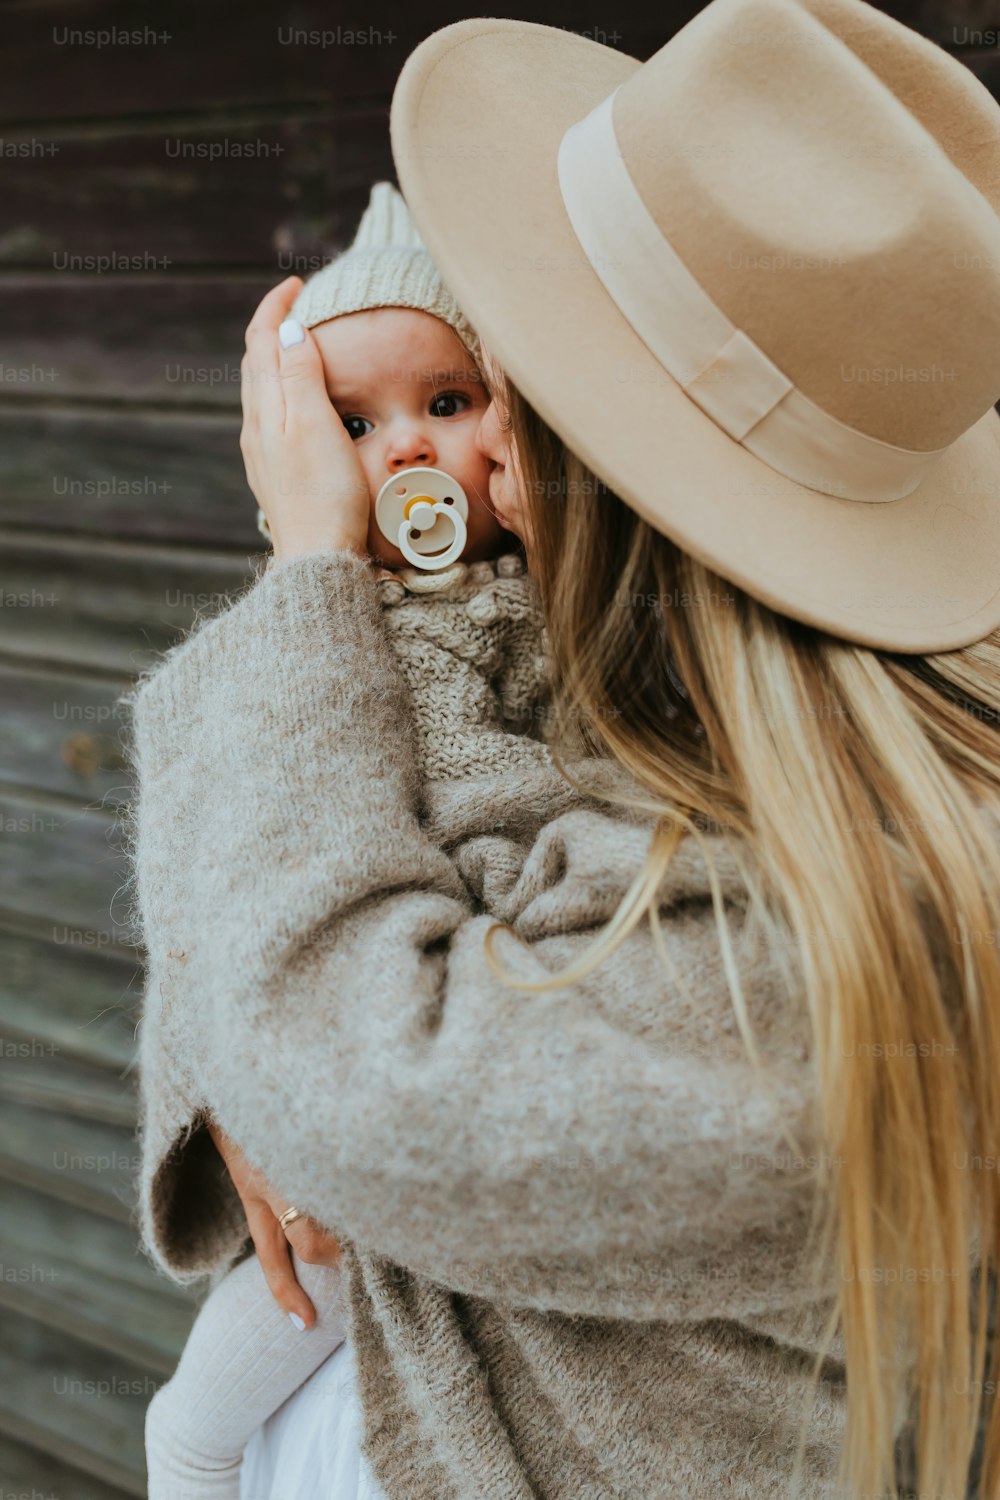 a woman holding a baby wearing a hat